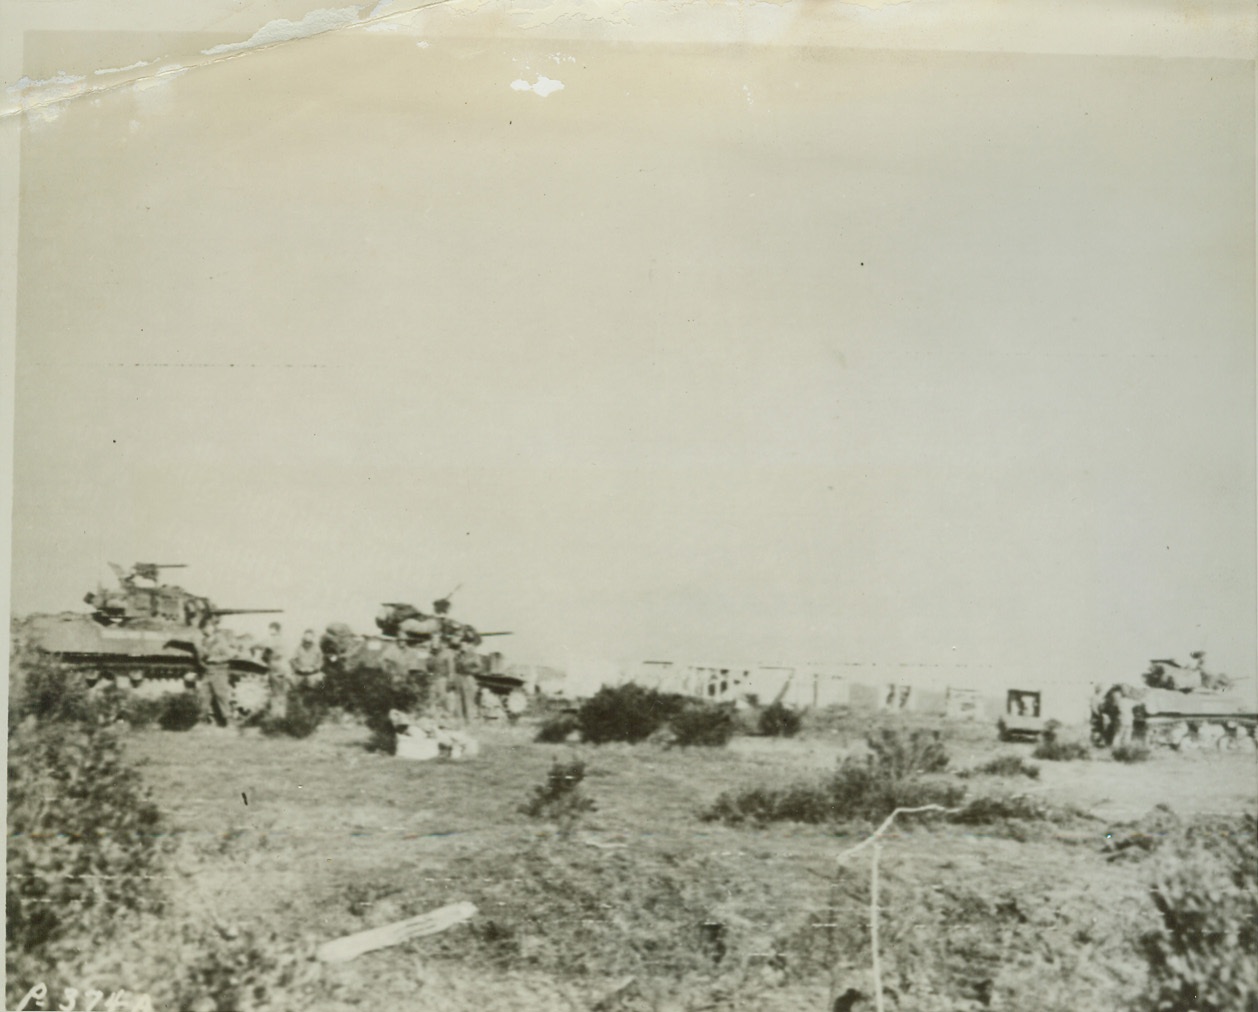 Short cut to Rome, 1/24/1944. Italy – In this photo flashed to the United States by Radiotelephoto today, American Army light tanks stop far inland from the beachheads captured by the Allies in their “shortcut” landings south of Rome. Reason for the halt (above) are the concrete barriers (center background) put up the enemy. Today, it was announced that Allied Forces have driven four miles inland and are less than 30 miles from Rome. They have still encountered little resistance from the Germans. Credit: (U.S. Signal Corps Radiotelephoto from ACME);